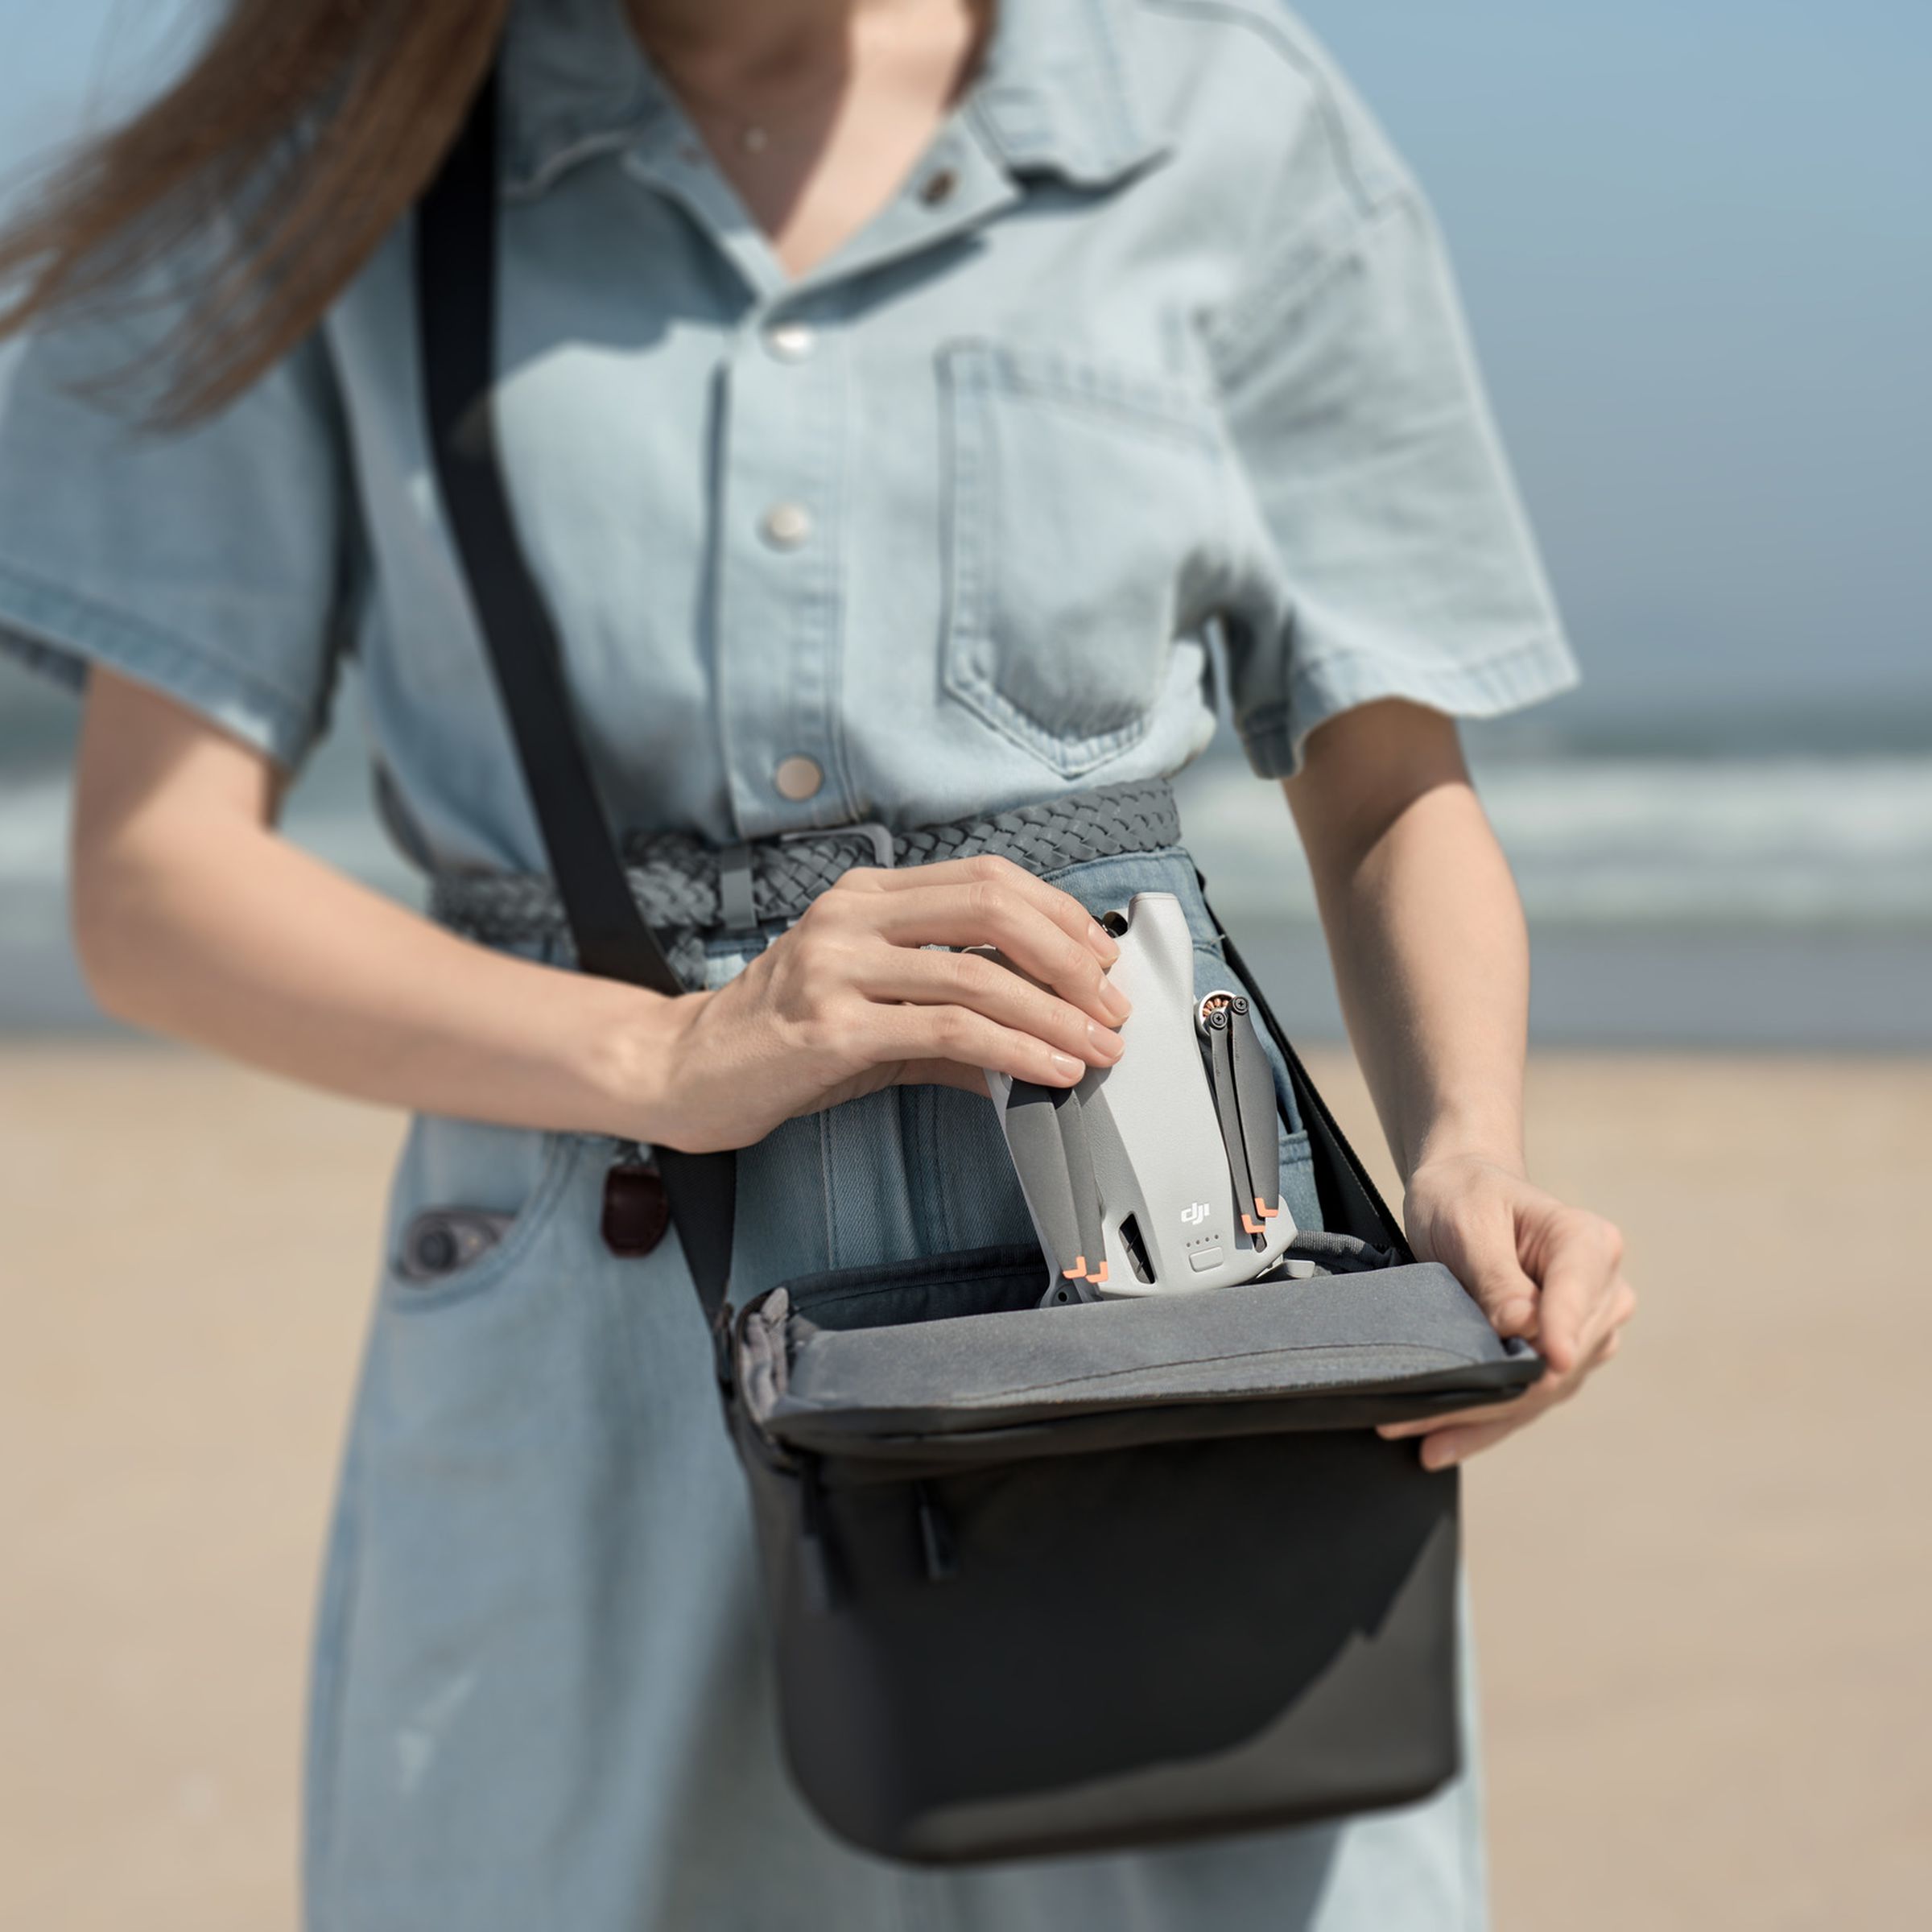 A person on the beach, placing a compacted DJI Mini 3 drone into an average sized handbag.